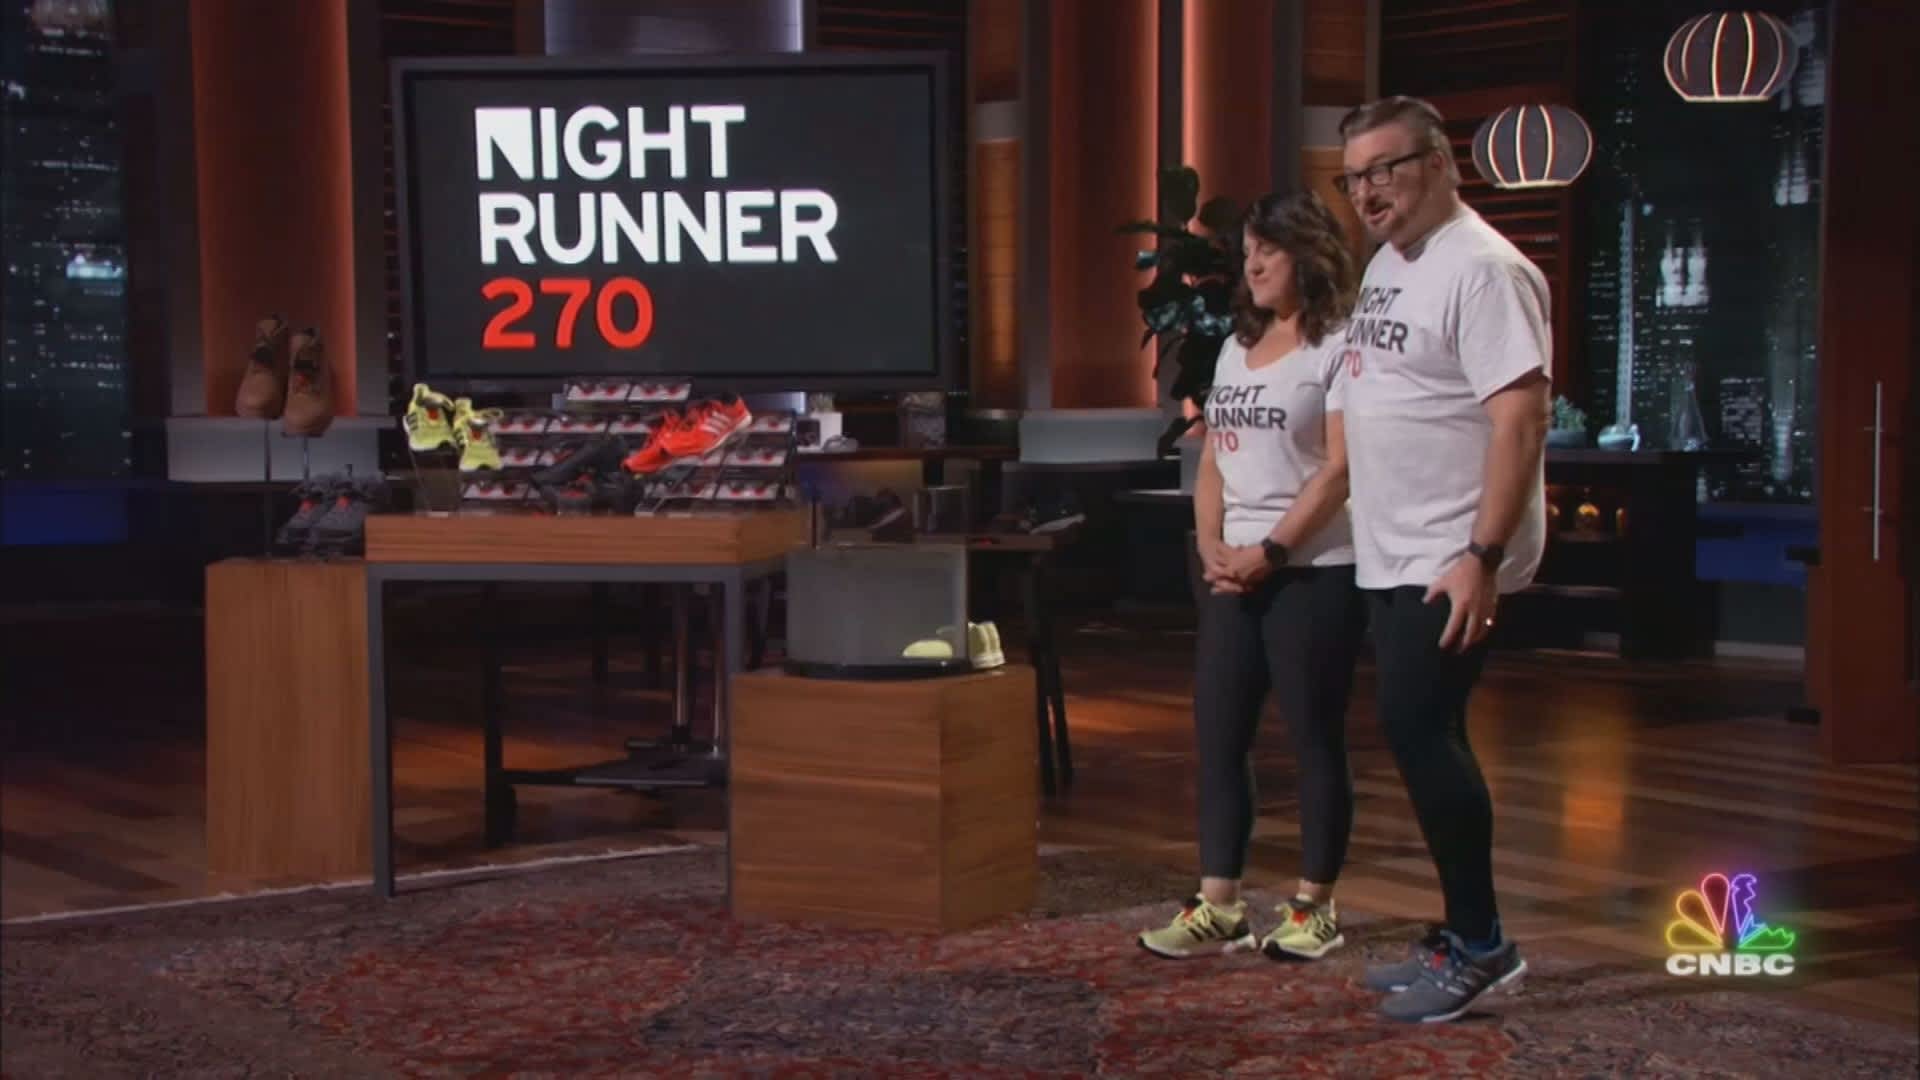 Remyxx Recycled Sneakers Using Shark Tank Publicity Wisely - Shark Tank Blog